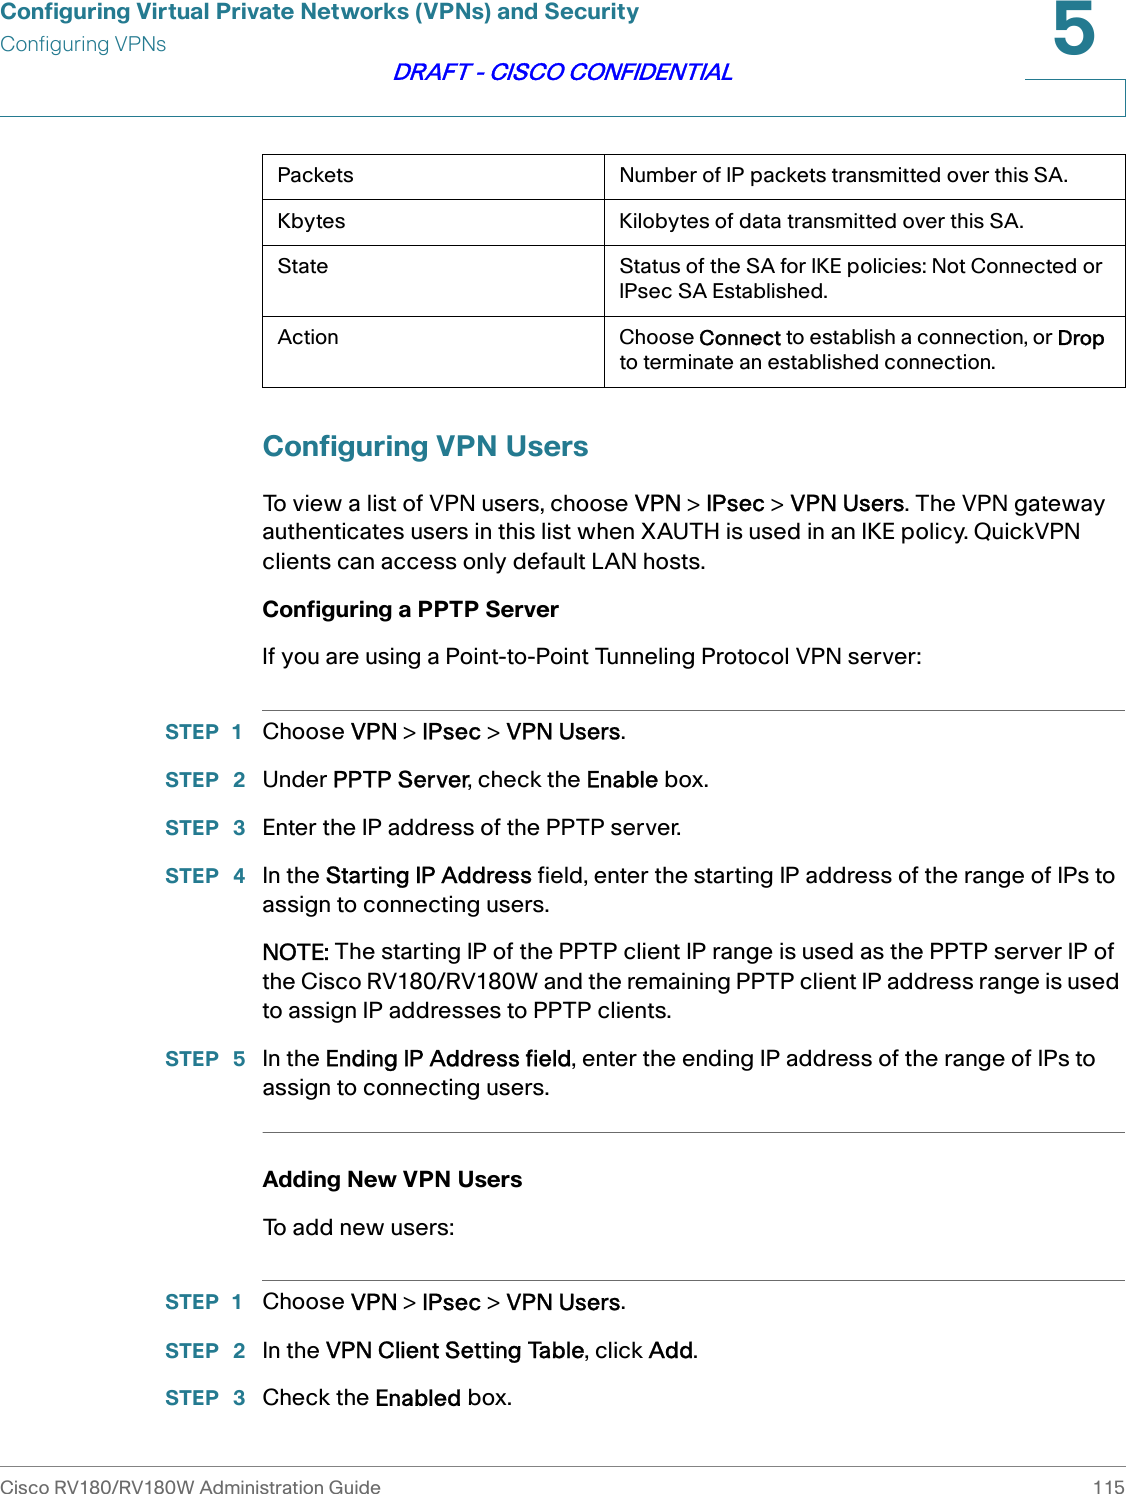 Configuring Virtual Private Networks (VPNs) and SecurityConfiguring VPNsCisco RV180/RV180W Administration Guide 1155DRAFT - CISCO CONFIDENTIALConfiguring VPN UsersTo view a list of VPN users, choose VPN &gt; IPsec &gt; VPN Users. The VPN gateway authenticates users in this list when XAUTH is used in an IKE policy. QuickVPN clients can access only default LAN hosts.Configuring a PPTP ServerIf you are using a Point-to-Point Tunneling Protocol VPN server:STEP 1 Choose VPN &gt; IPsec &gt; VPN Users.STEP  2 Under PPTP Server, check the Enable box.STEP  3 Enter the IP address of the PPTP server.STEP  4 In the Starting IP Address field, enter the starting IP address of the range of IPs to assign to connecting users.NOTE: The starting IP of the PPTP client IP range is used as the PPTP server IP of the Cisco RV180/RV180W and the remaining PPTP client IP address range is used to assign IP addresses to PPTP clients.STEP  5 In the Ending IP Address field, enter the ending IP address of the range of IPs to assign to connecting users.Adding New VPN UsersTo add new users:STEP 1 Choose VPN &gt; IPsec &gt; VPN Users.STEP  2 In the VPN Client Setting Table, click Add.STEP  3 Check the Enabled box.Packets Number of IP packets transmitted over this SA.Kbytes Kilobytes of data transmitted over this SA.State Status of the SA for IKE policies: Not Connected or IPsec SA Established.Action Choose Connect to establish a connection, or Drop to terminate an established connection.